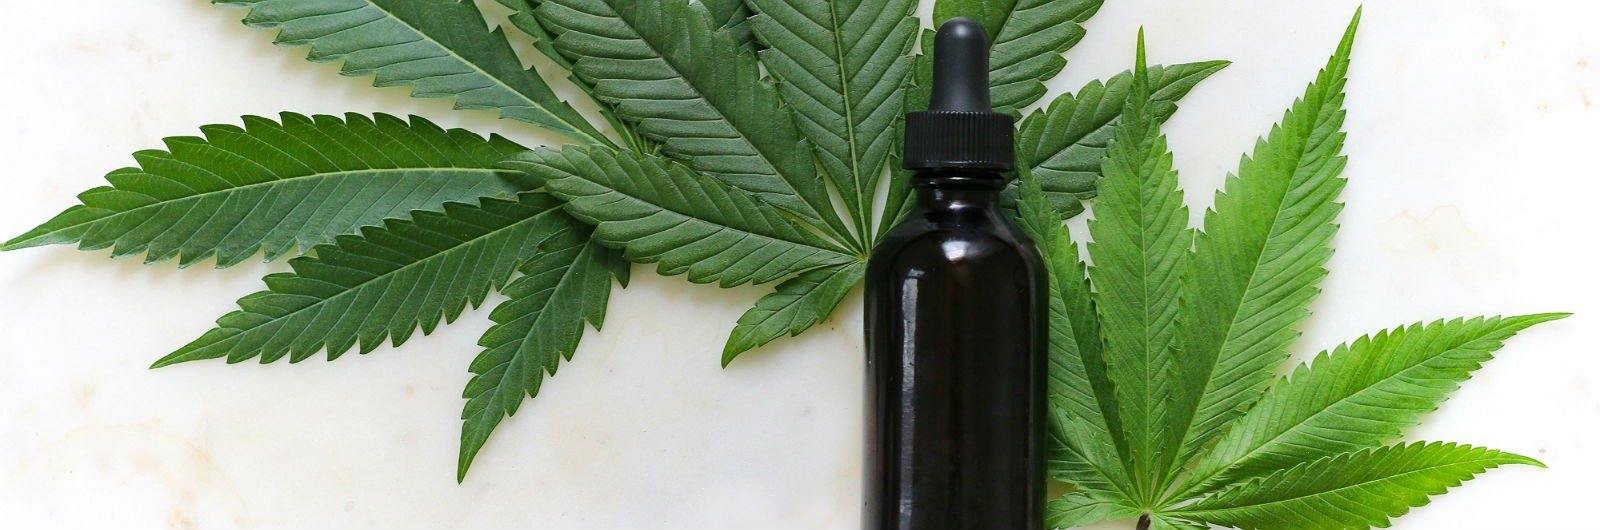 THE 10 CBD TREATS YOU NEED TO SURVIVE THANKSGIVING - MAD TASTY